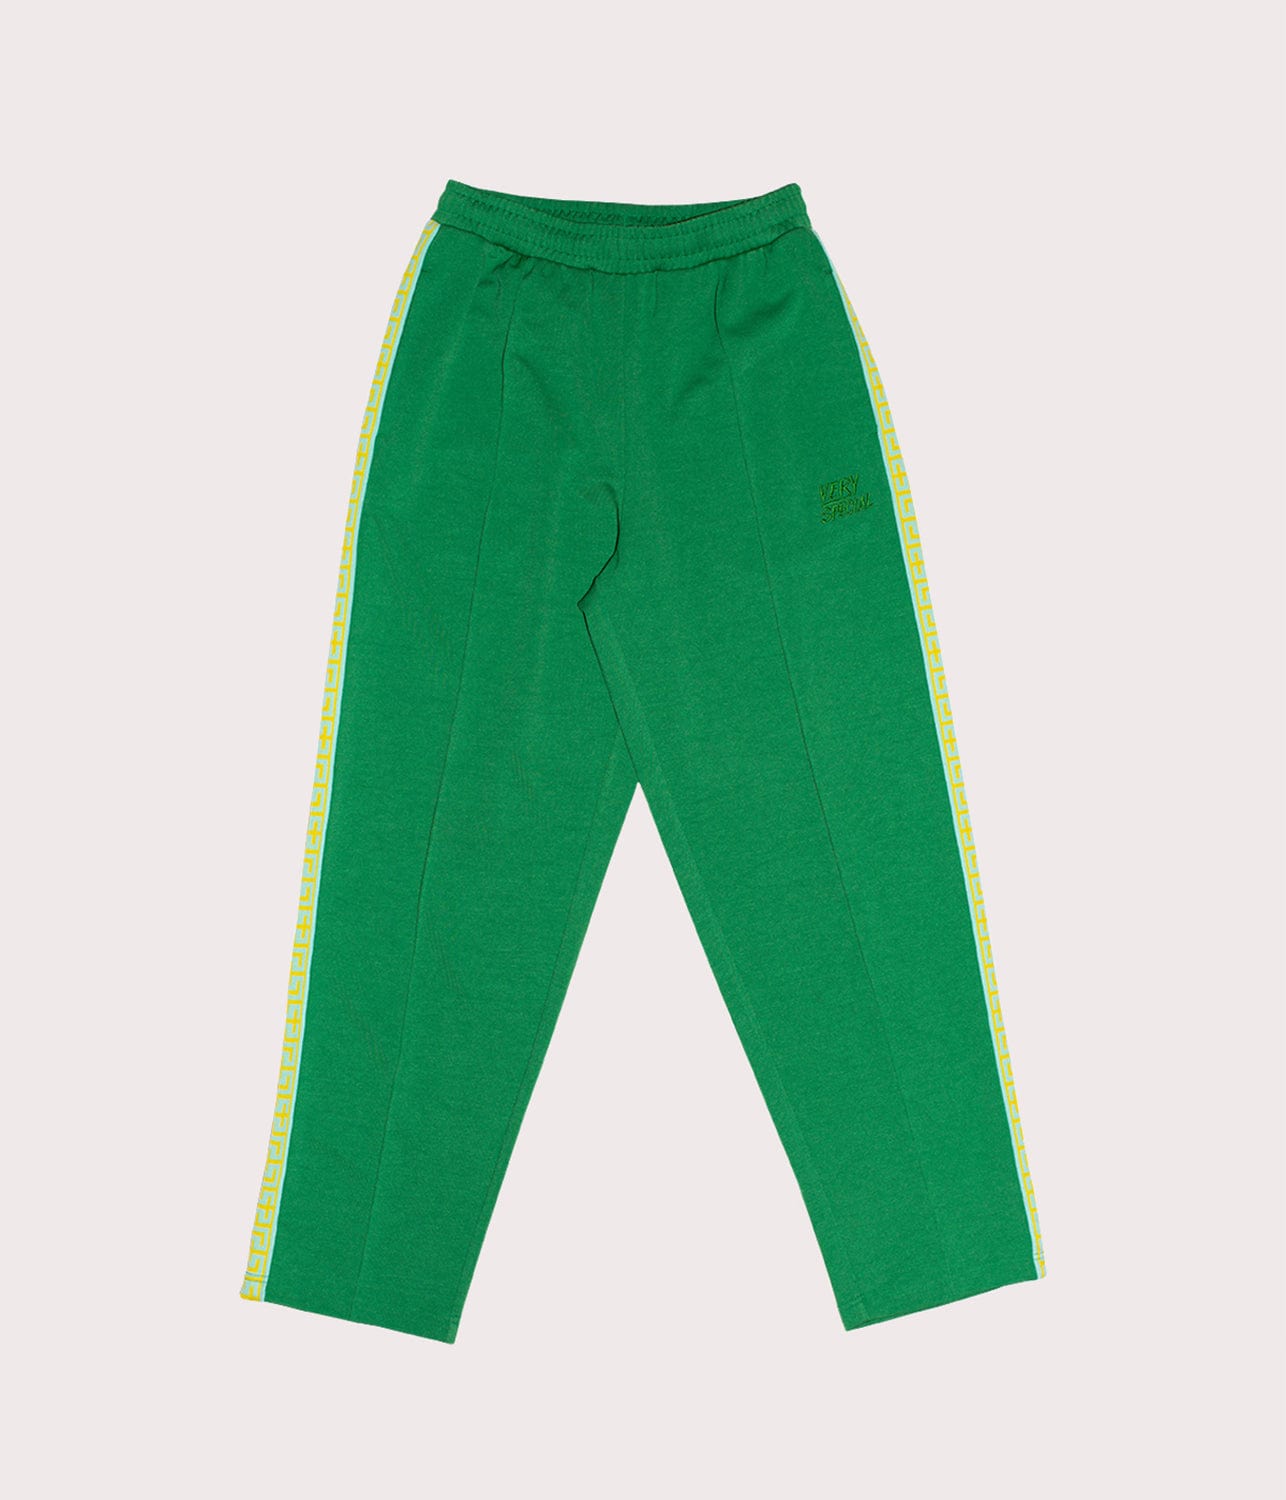 GEO TRACKPANTS- GREEN | SOMETHING VERY SPECIAL | SOMETHING VERY SPECIAL GEO TRACKPANTS- GREEN